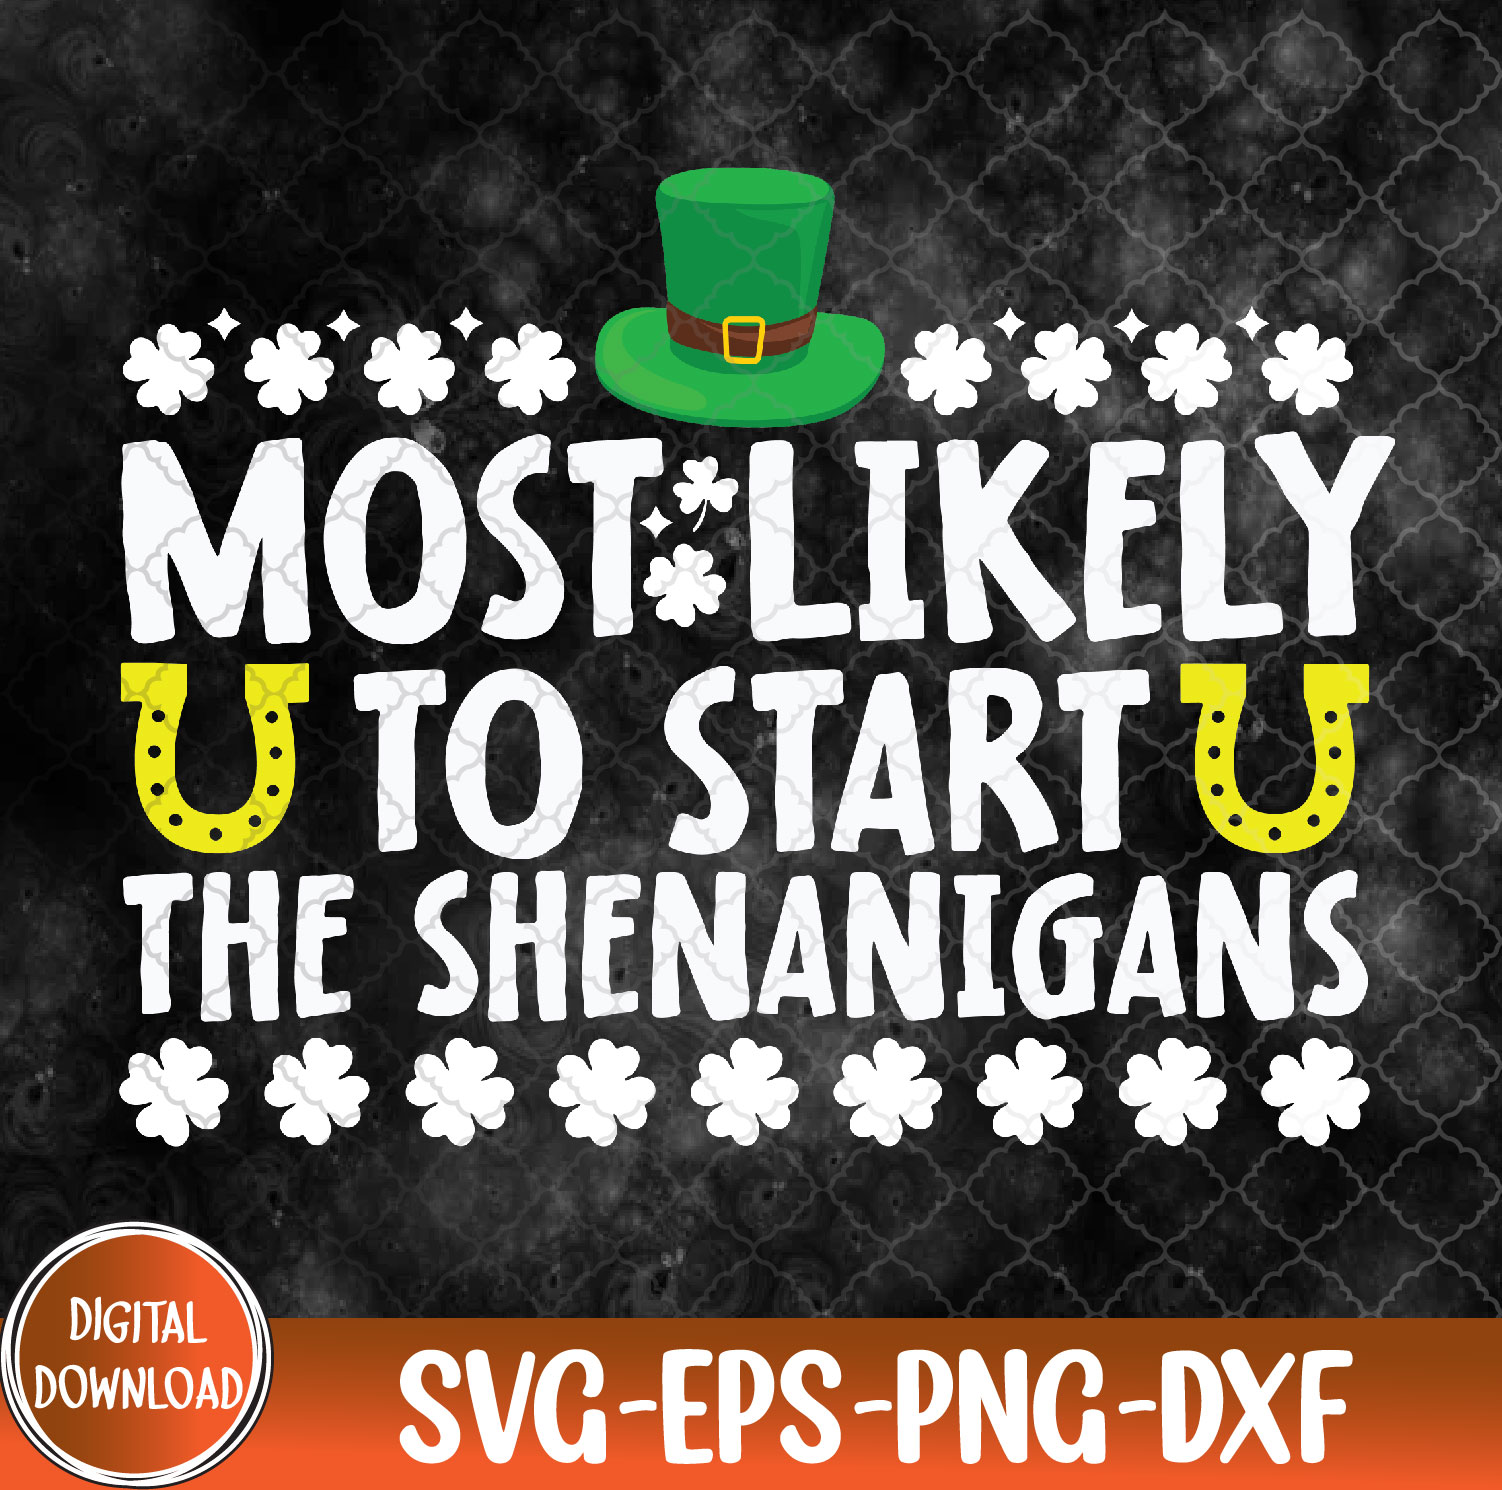 WTMNEW9file 09 190 Most Likely To Start The Shenanigans Irish St Patrick's Day Svg, Eps, Png, Dxf